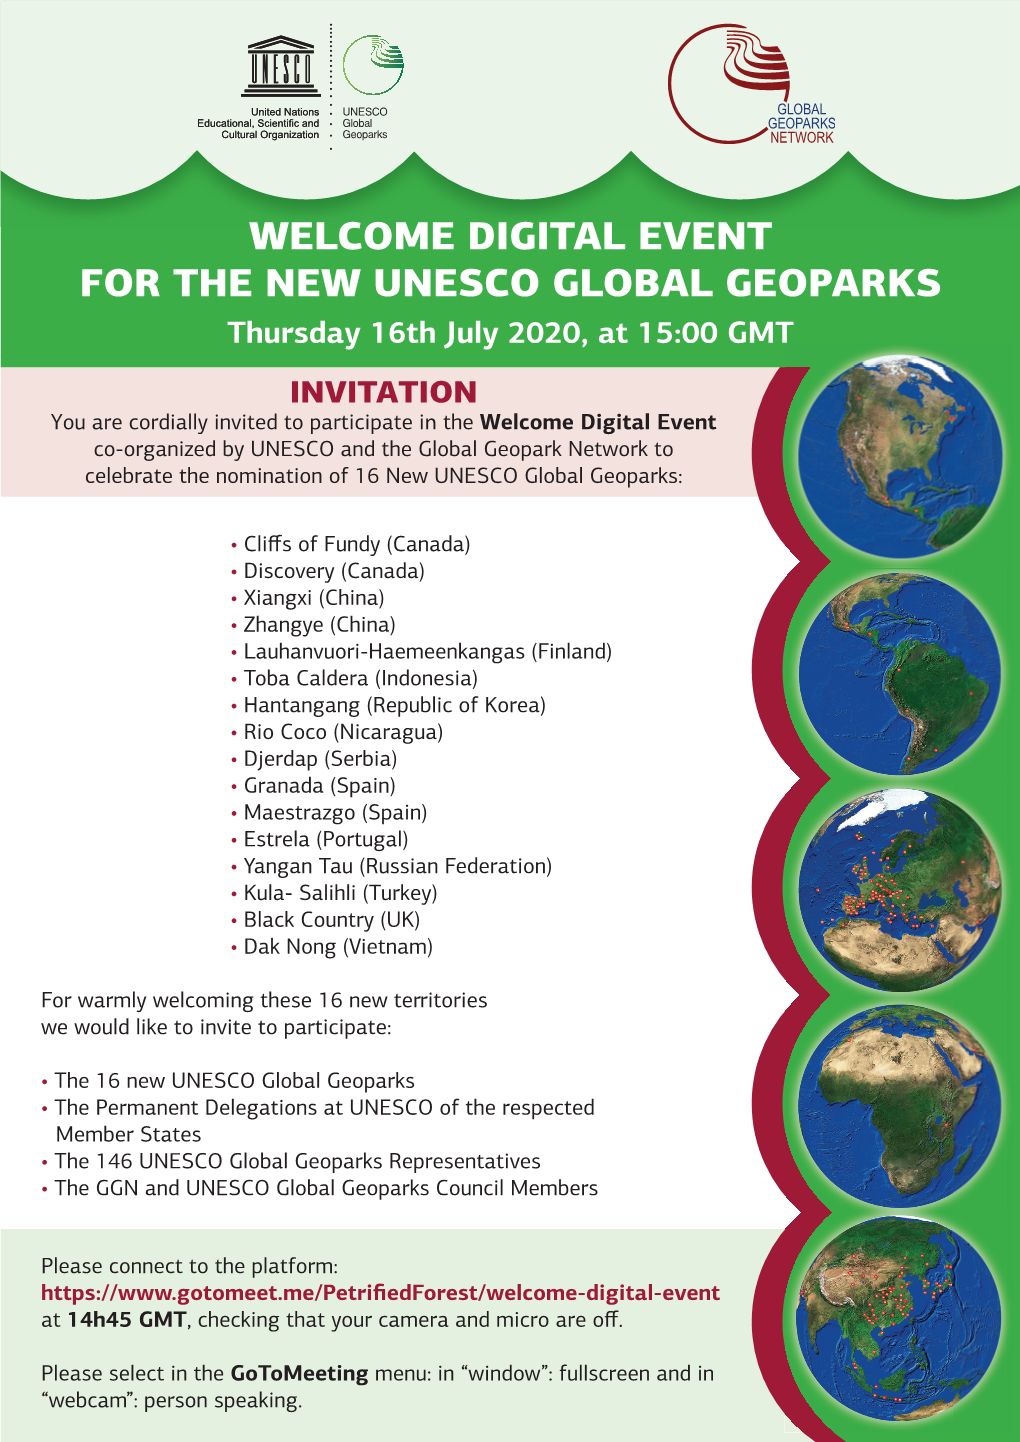 Digital Event for the New Unesco Global Geoparks